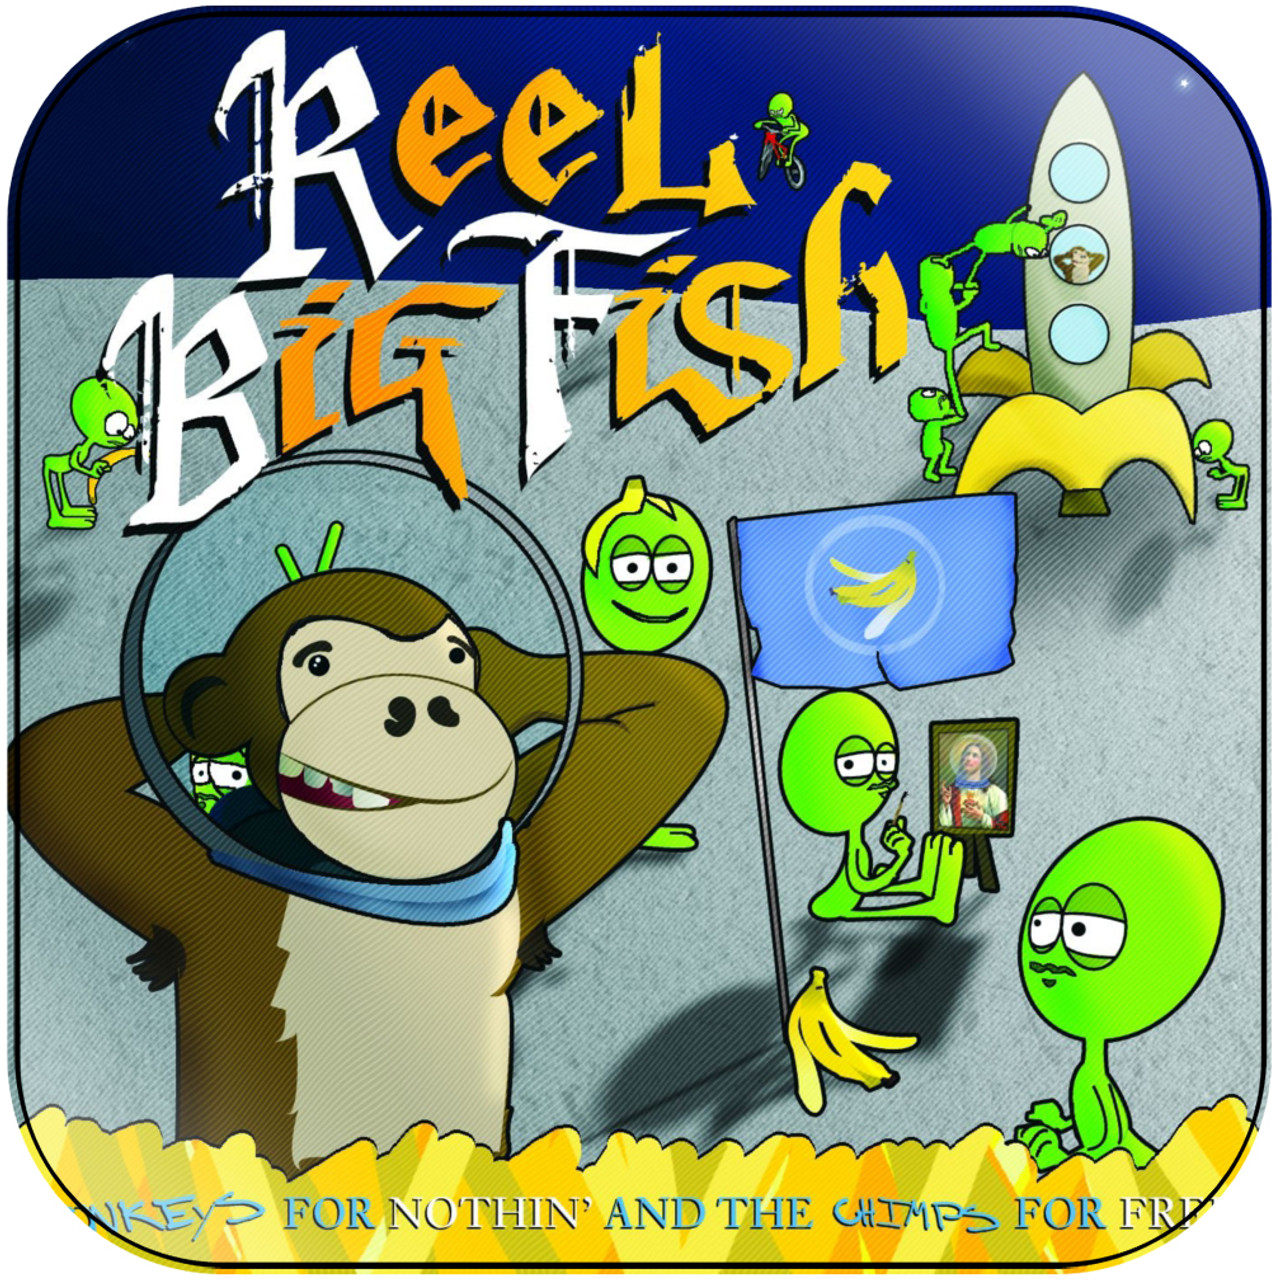 Stream Sell Out - Reel Big Fish Cover by Georgiiii